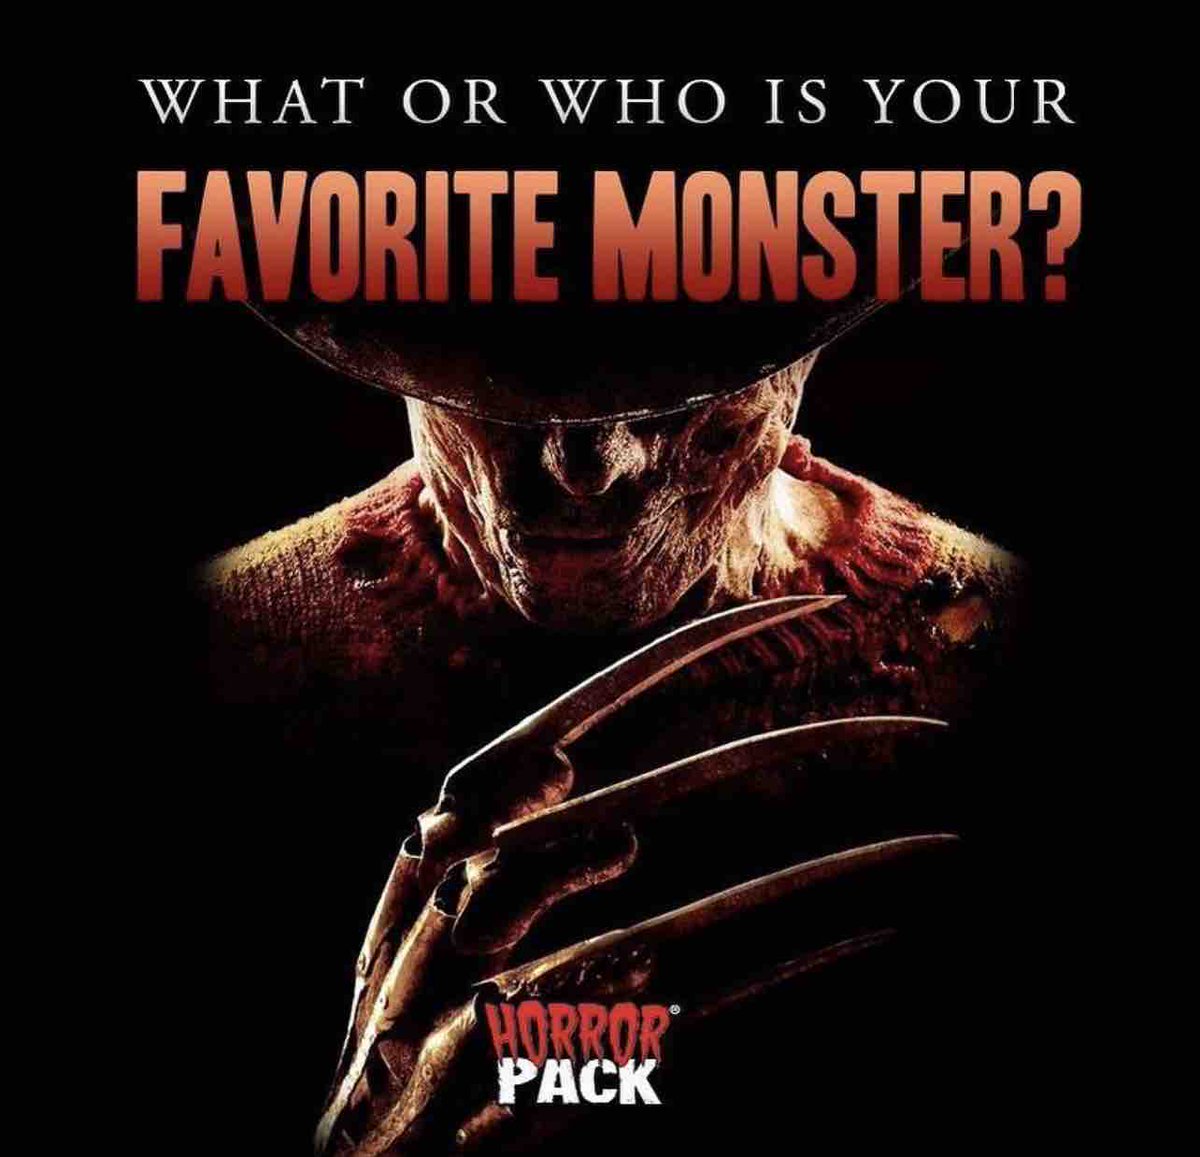 What or who is your favorite monster?